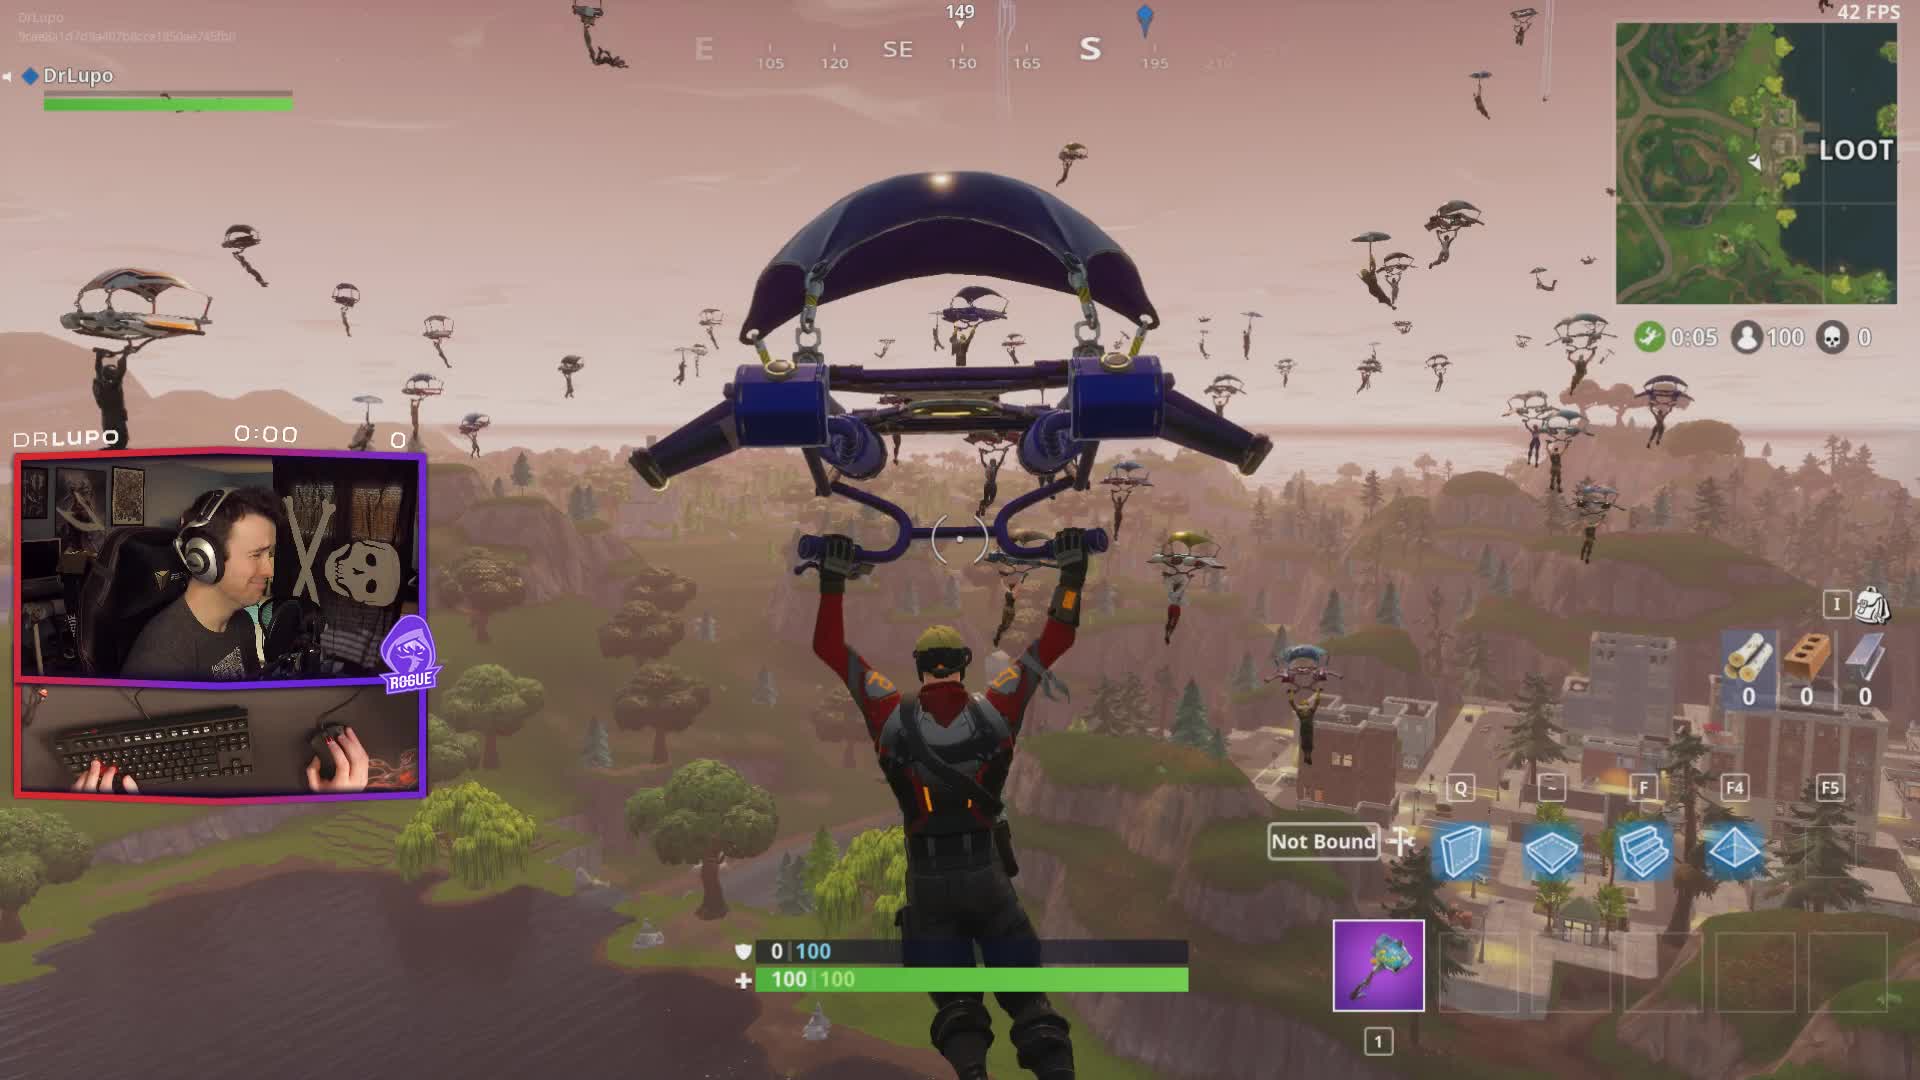 Apparently Fortnite Breaks When 100 People Land at Tilted Towers